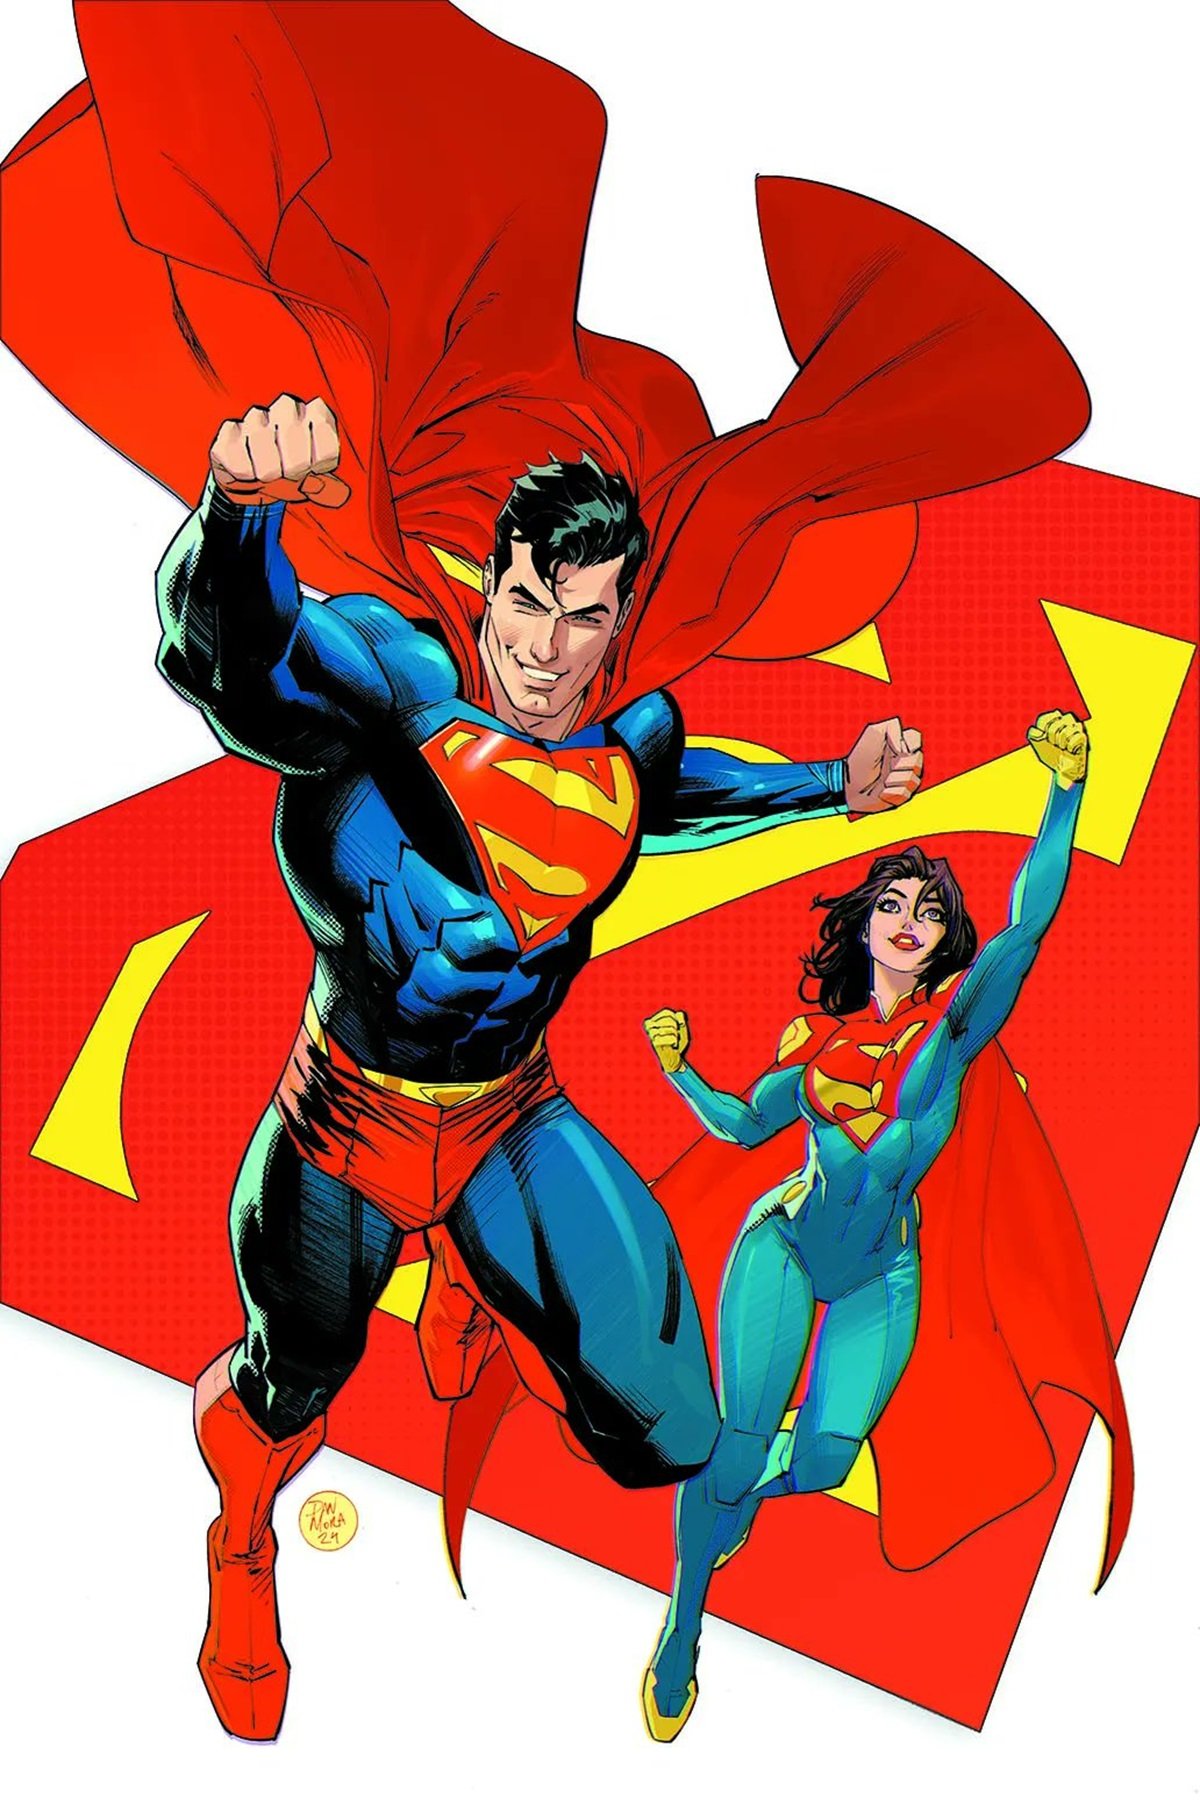 Superman and Superwoman (Lois Lane) in the DC All-In launch cover by Dan Mora.